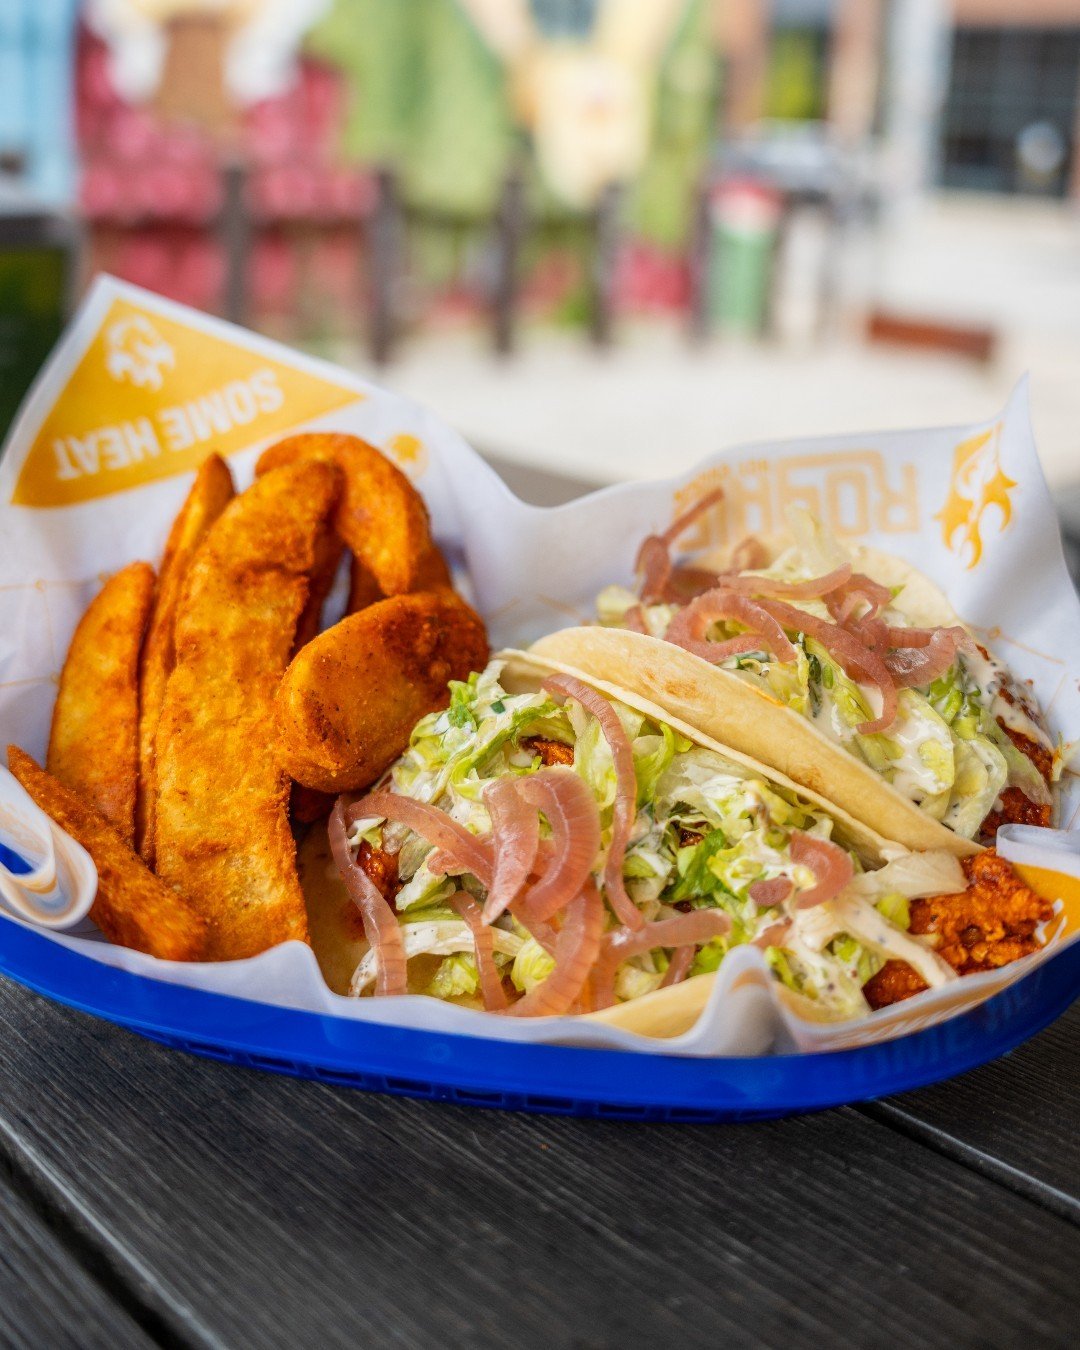 A fan favorite, and for good reason. Come get a little 🔥spice🔥 with your tacos at Royals. #JumboTenderTacos